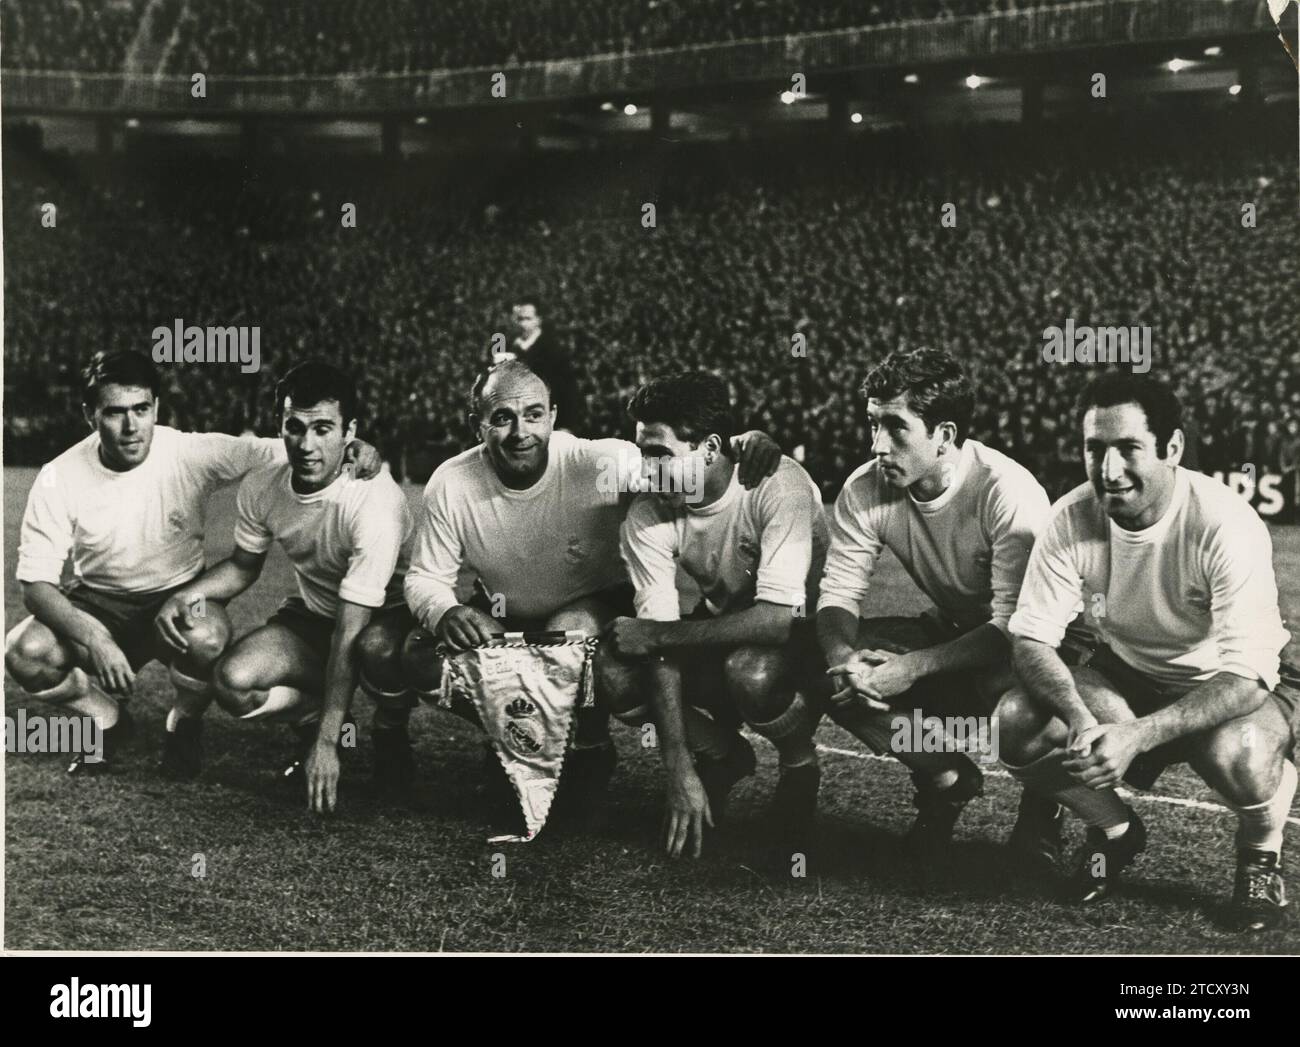 06/07/1967. Tribute to Di Stéfano. The match ended with the result of real Madrid, 0; Celtic, 1. In the Image, Serena, Amancio, Di Stefano, Grosso, Velázquez and Gento. Di Stéfano was awarded the medal for sporting merit. Alfredo Di Stéfano Retires as a player. Credit: Album / Archivo ABC / Teodoro Naranjo Domínguez Stock Photo